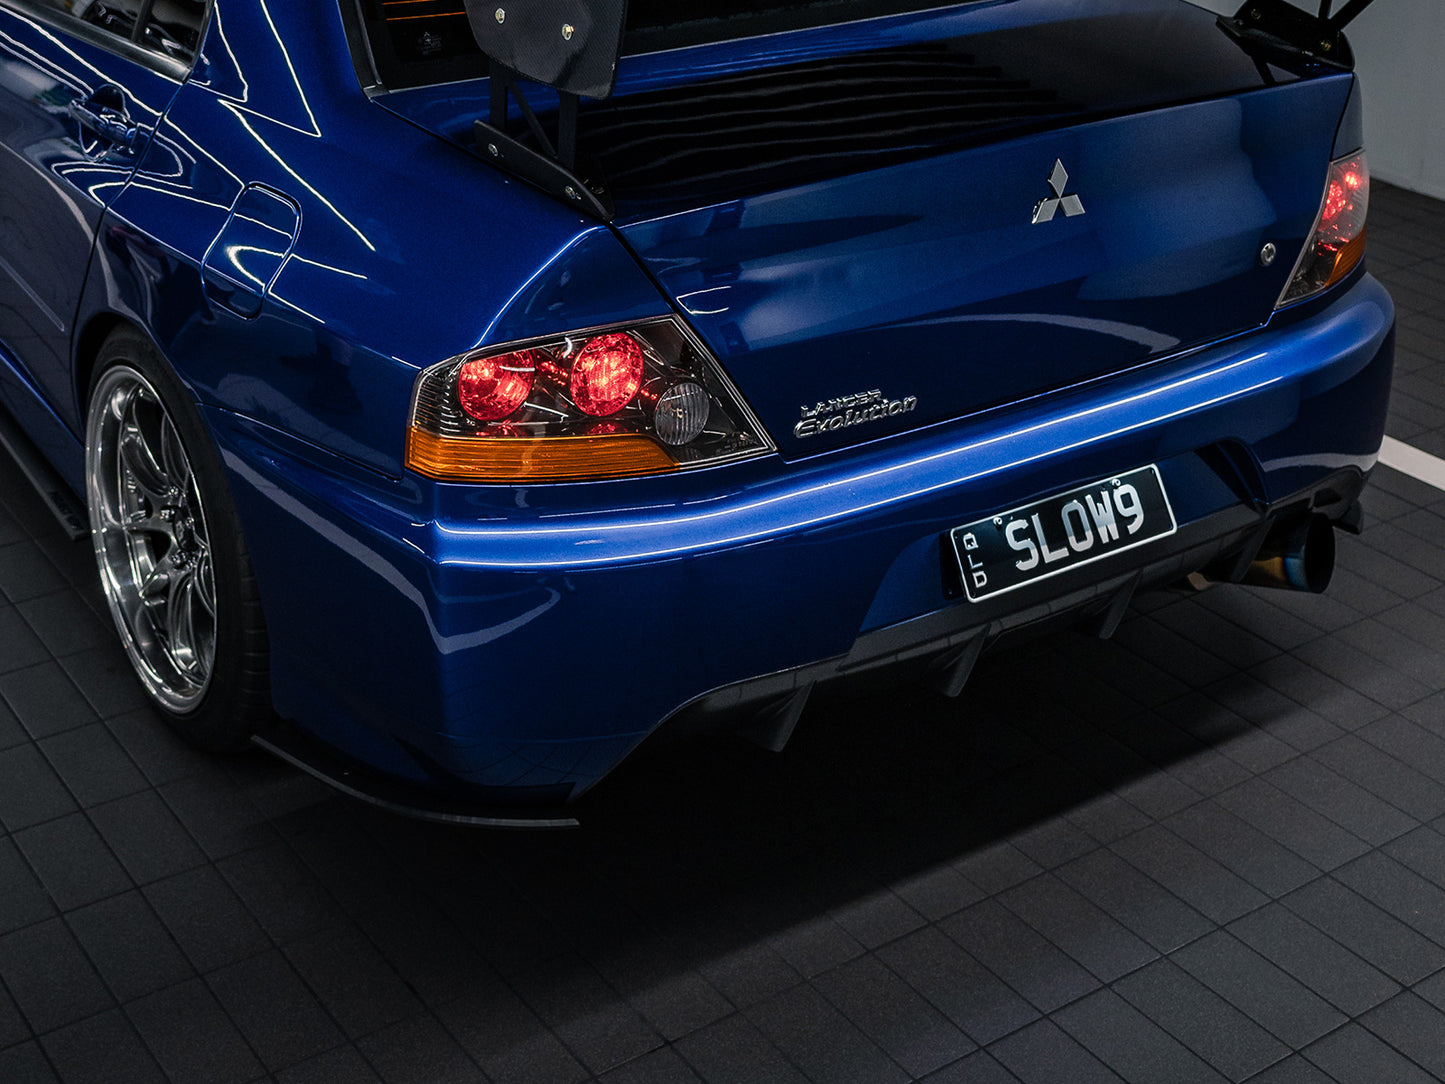 A must have for every Mitsubishi Evo 9 rear bumper is the Project Aero rear spats to suit Evo 9